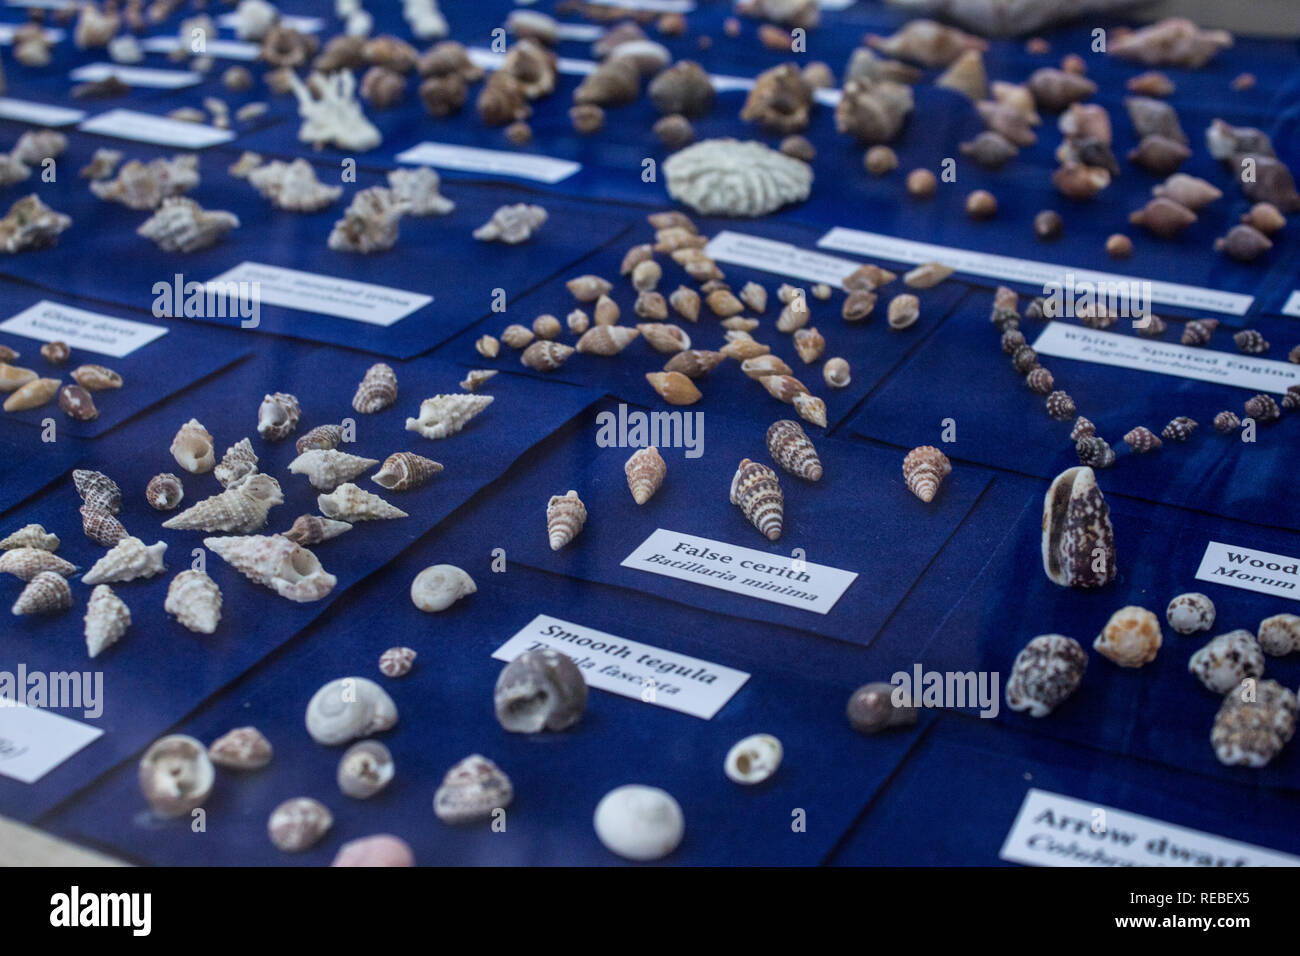 A photo of a selection of seashells on blue background. Scientific exhibition at La Salle Natural History Museum, San Jose, Costa Rica Stock Photo